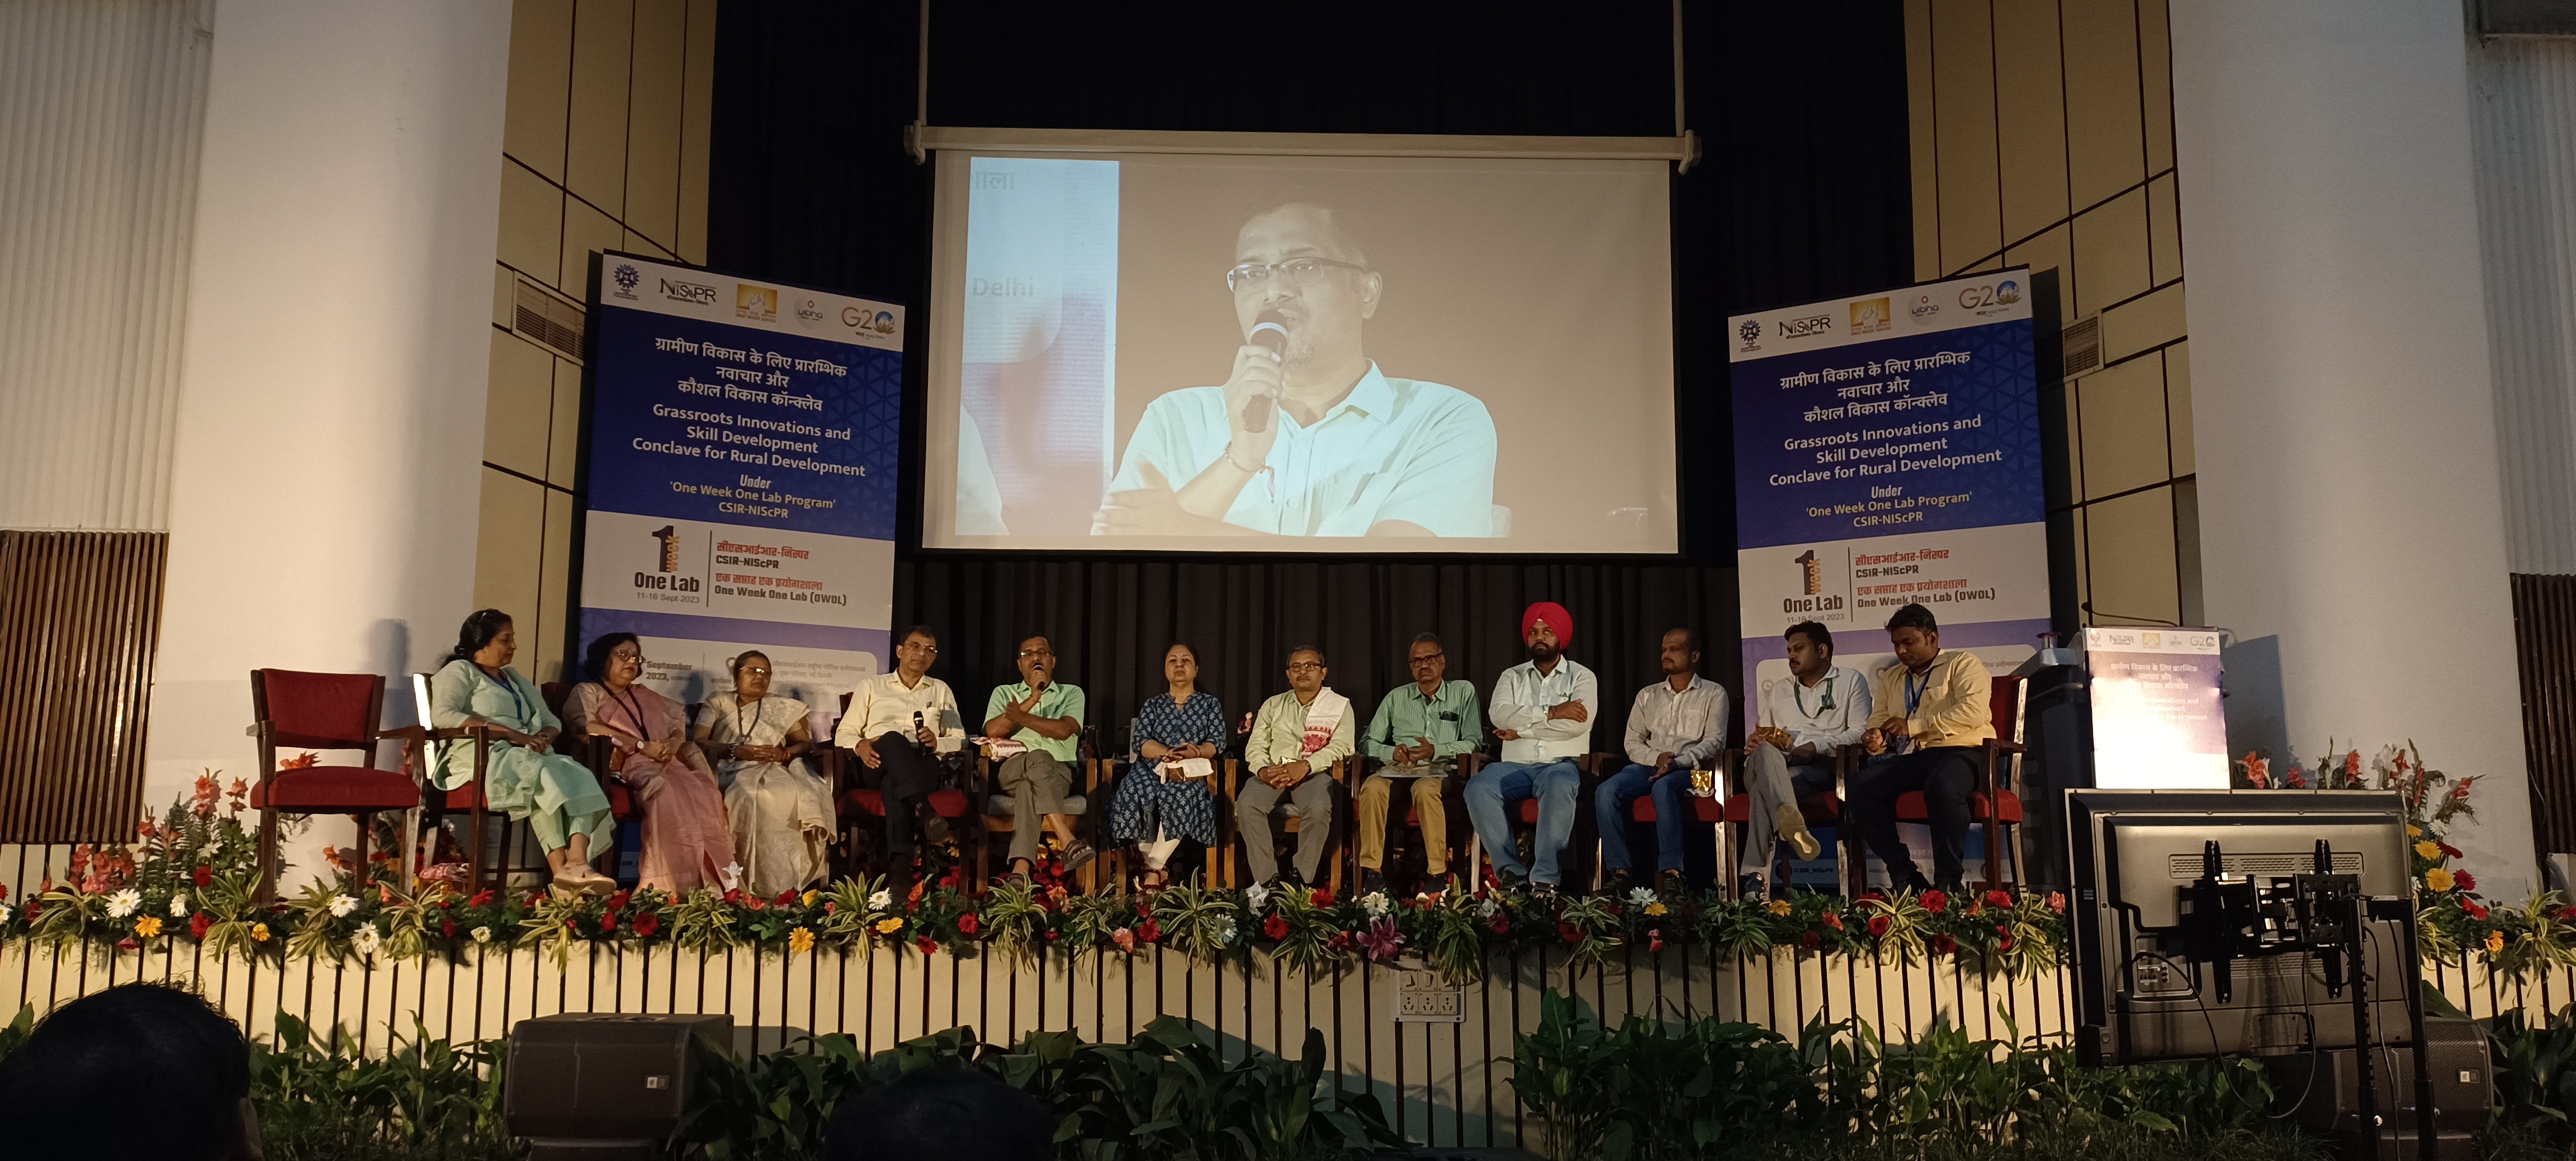 Grassroots Innovations and Skill Development  Conclave for Rural Development